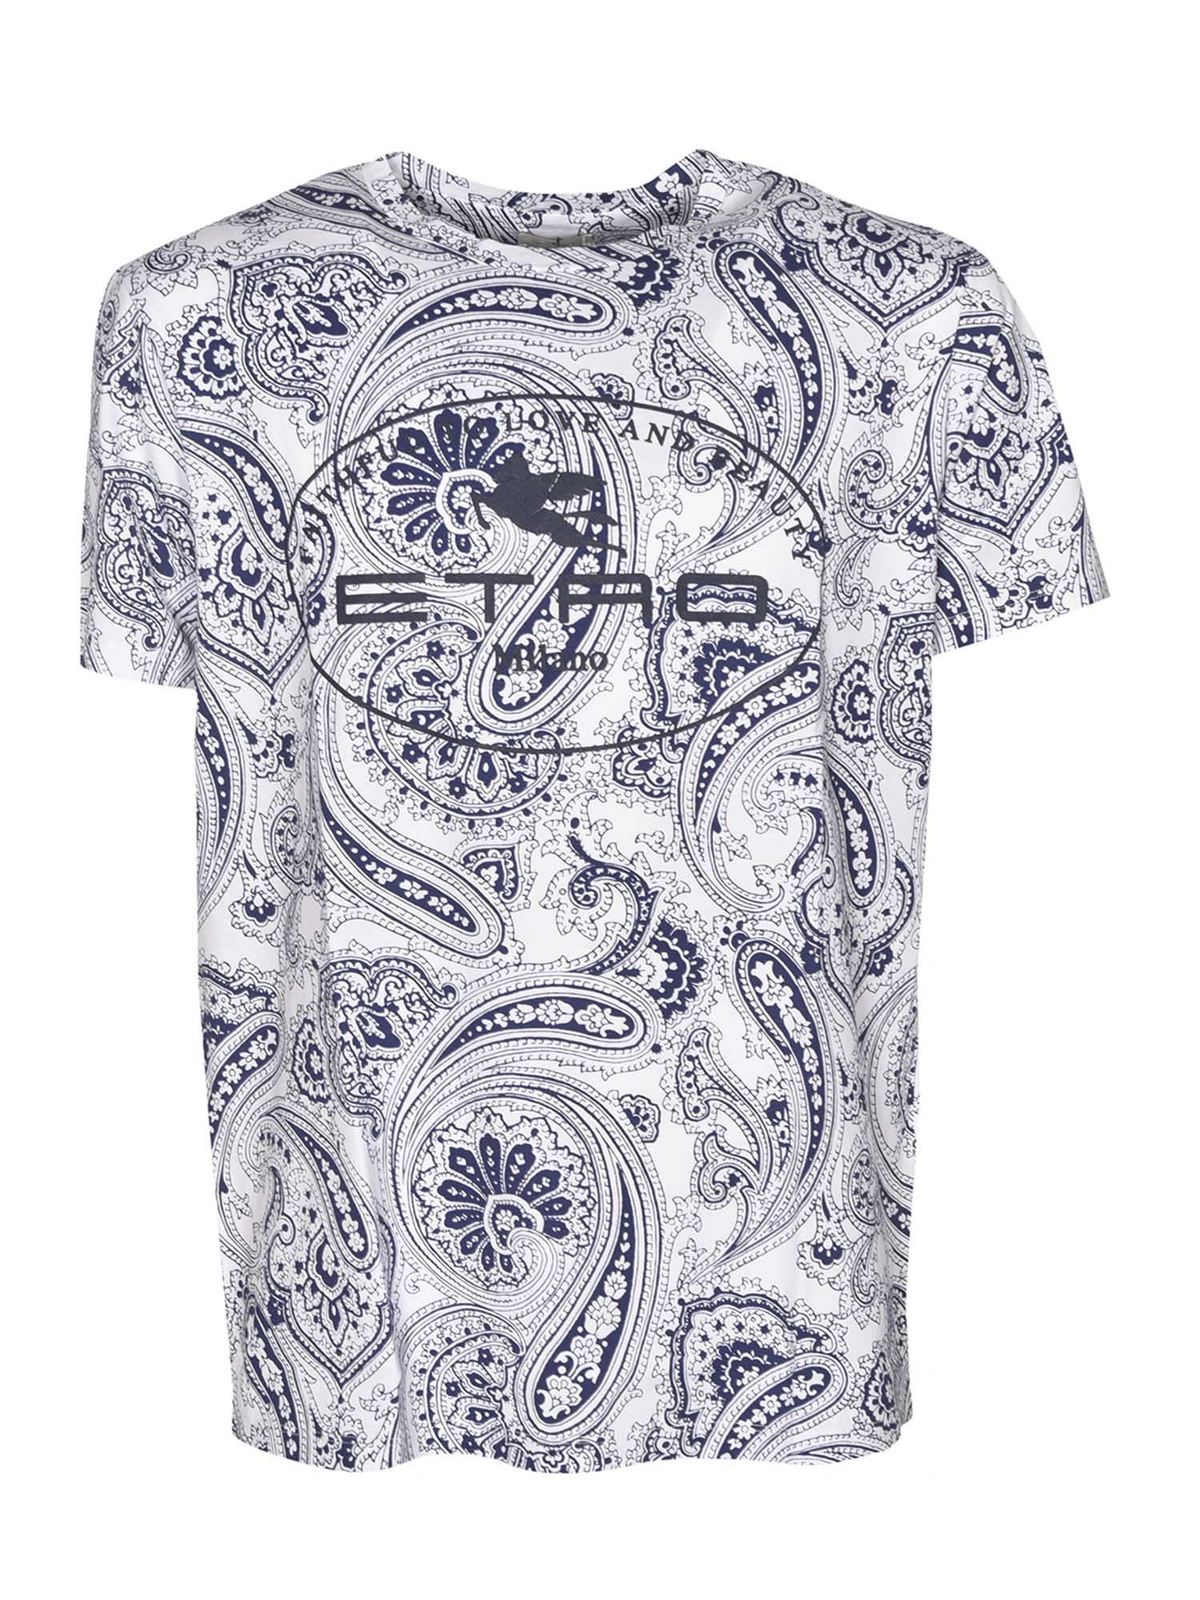 Etro PAISLEY PRINTED T-SHIRT IN WHITE AND BLUE